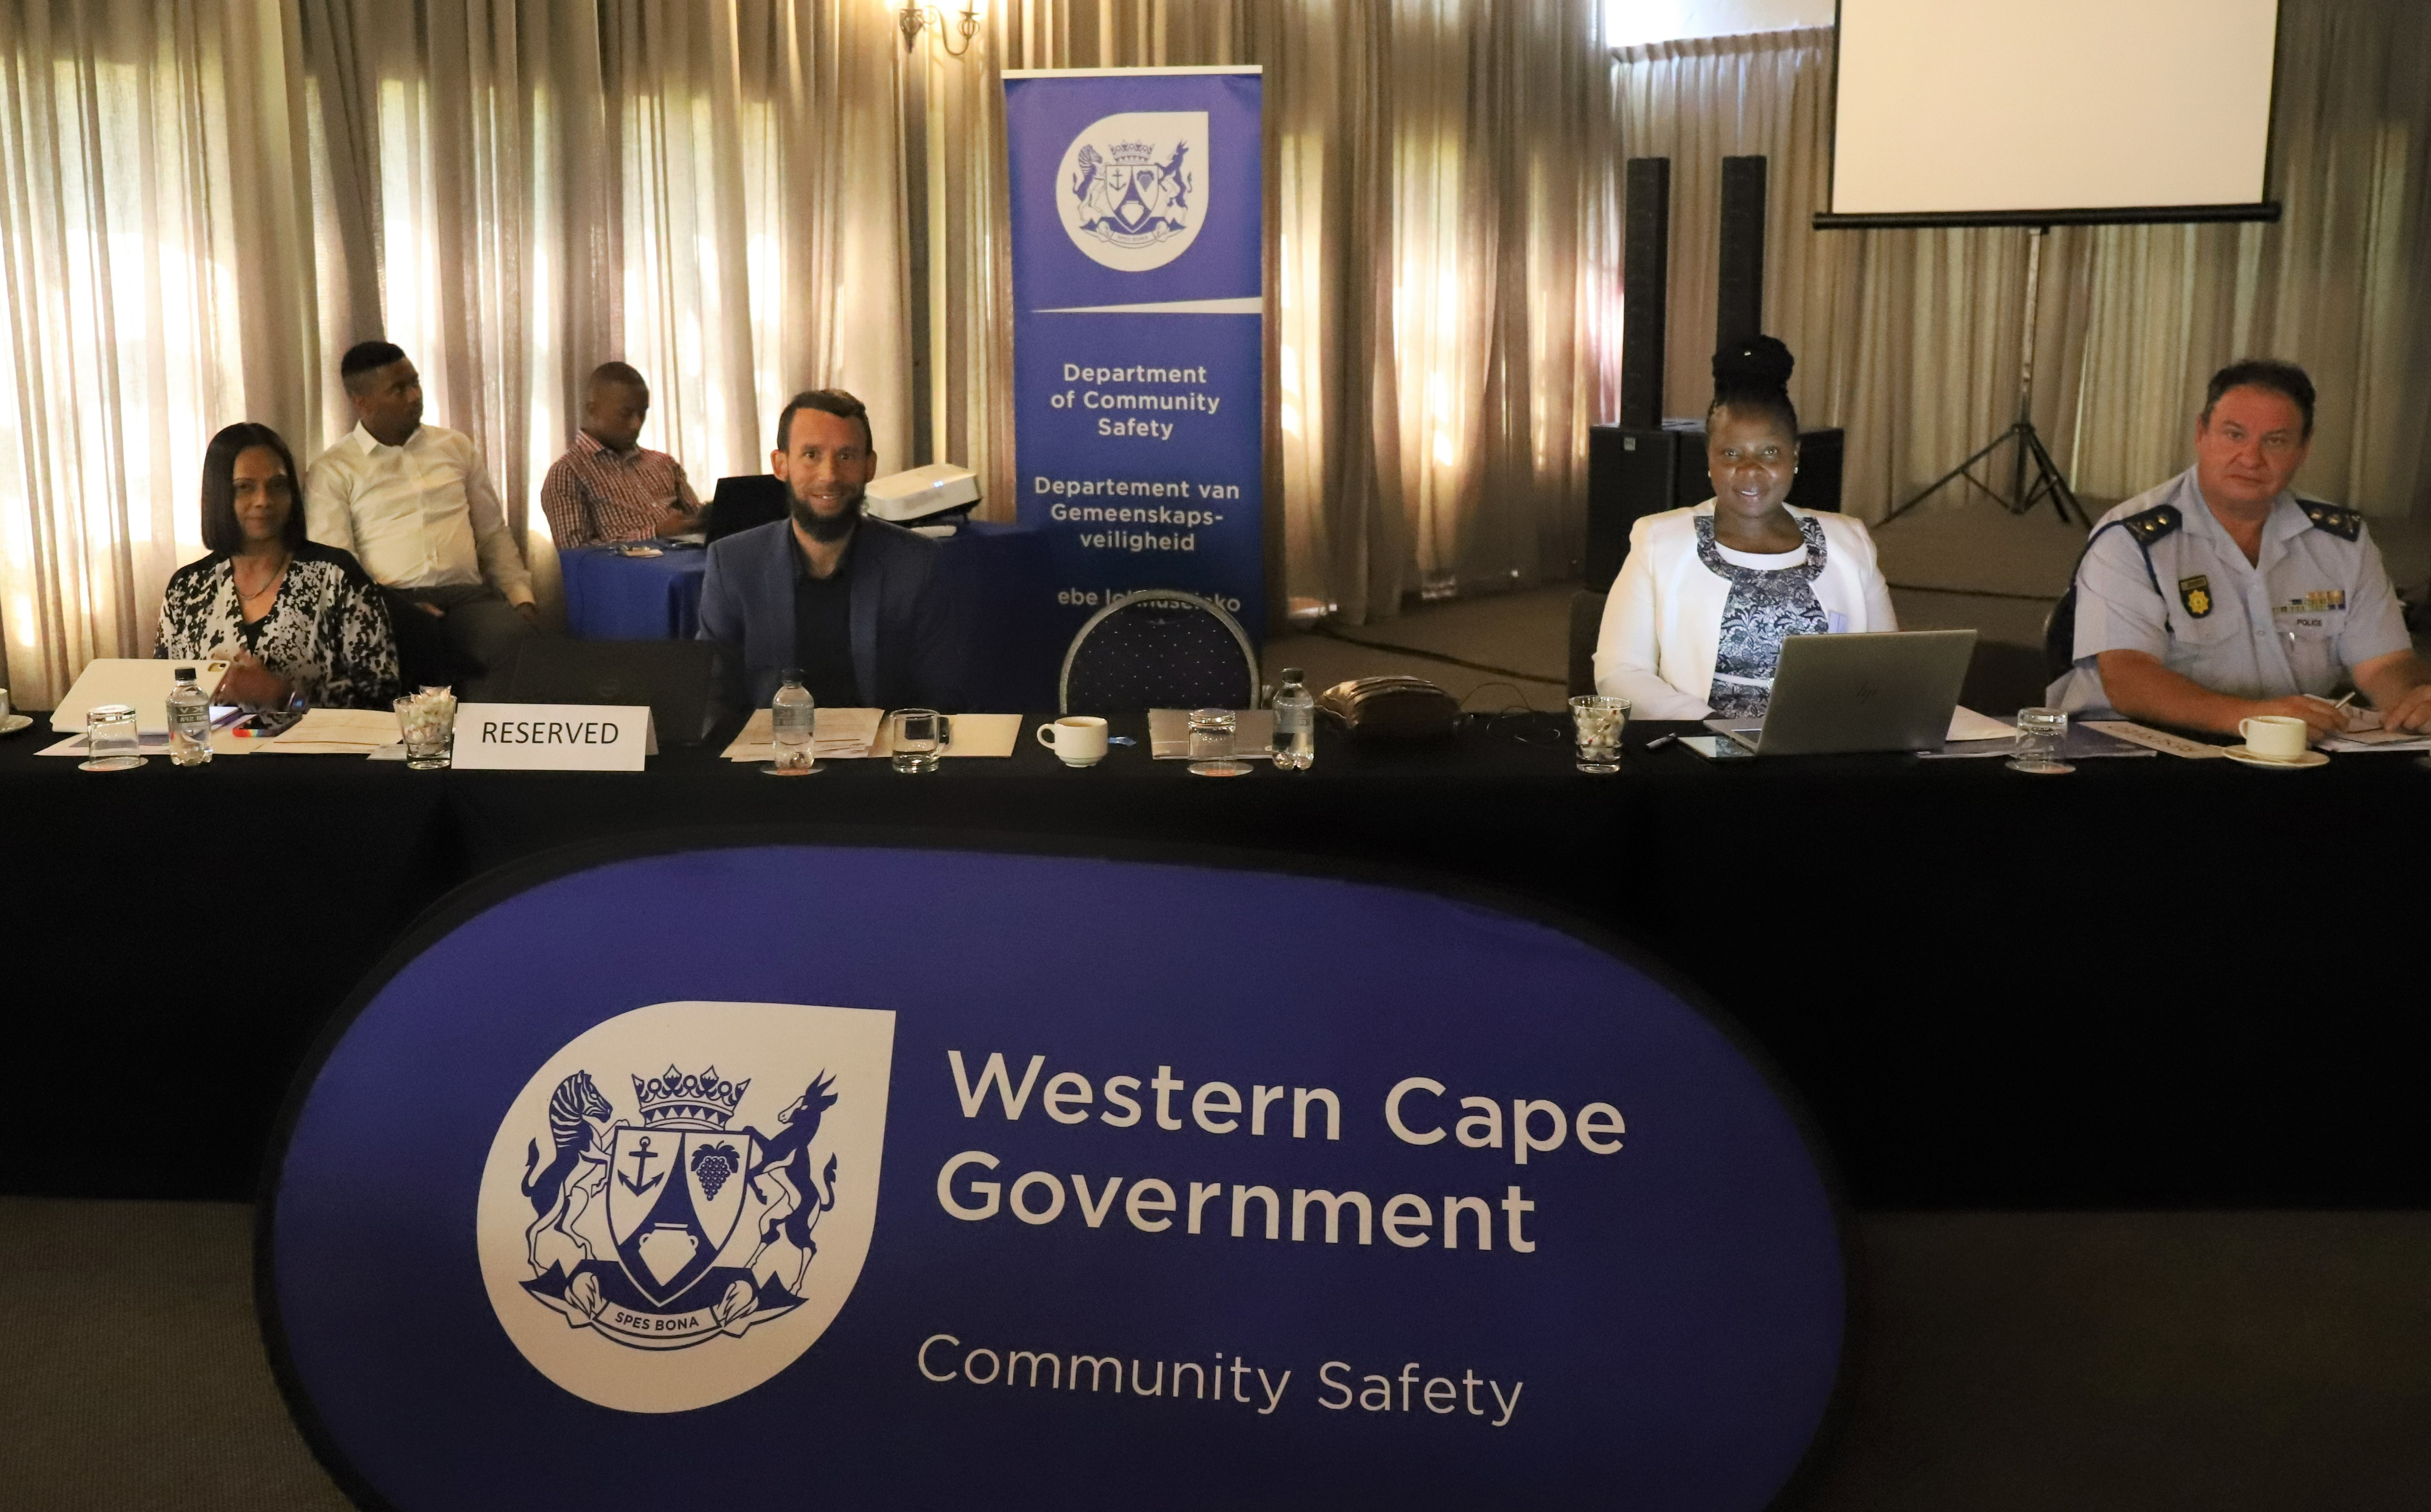 From left: Head of Department for Community Safety, Adv Yashina Pillay, Minister of Police Oversight and Community Safety, Mr Reagen Allen, Area Commissioner of Drakenstein at the Department of Correctional Services, Ms Ntomboxolo Kungene and South Africa